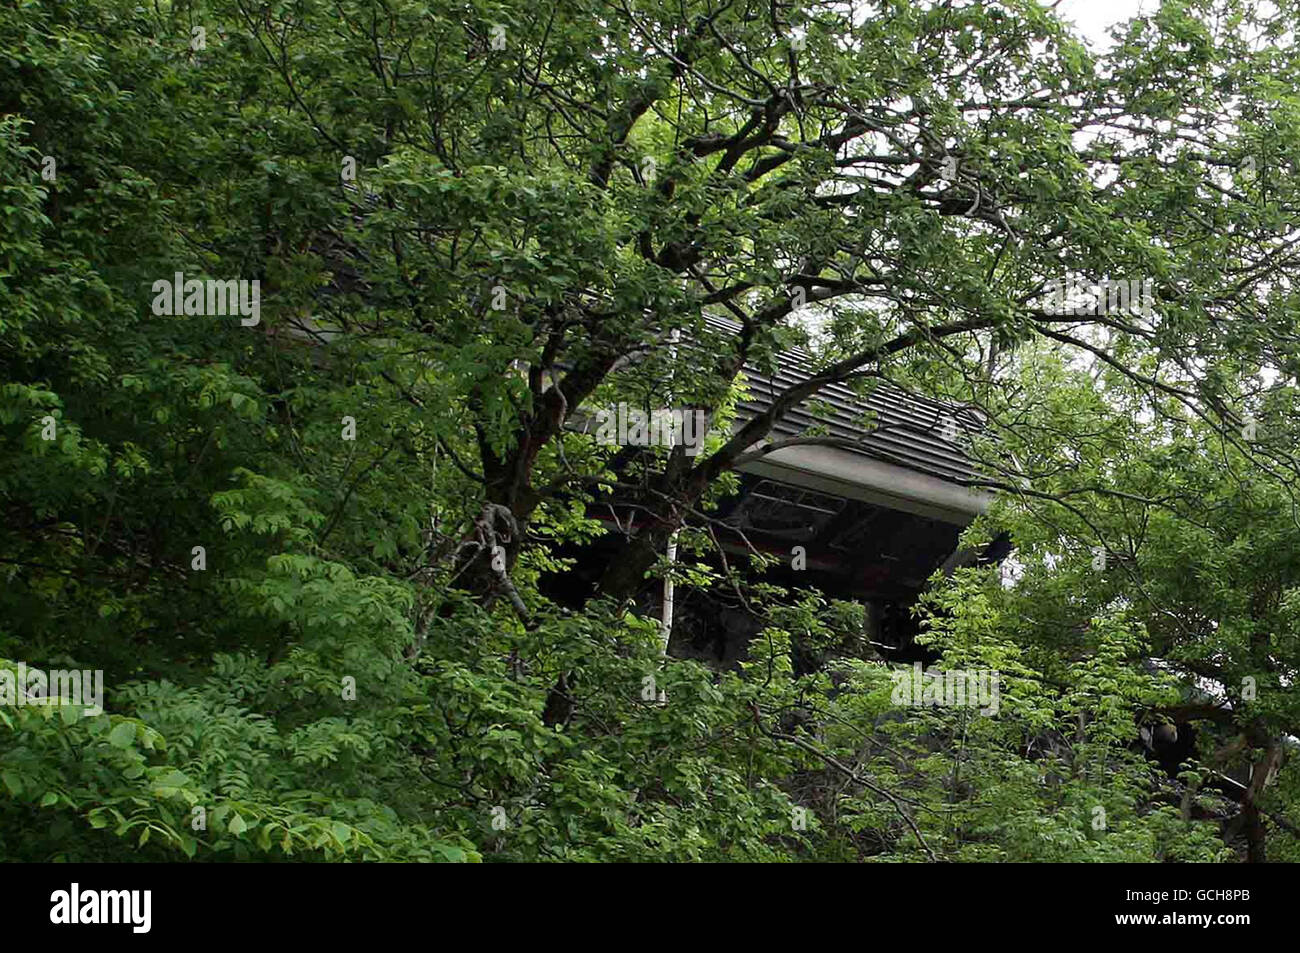 ALTERNATIVE CROP The derailed train seen through trees near the Falls of Cruachan power station, by Loch Awe in Argyll. Eight people were taken to hospital after 6.20pm service from Glasgow to Oban derailed and caught fire. Stock Photo